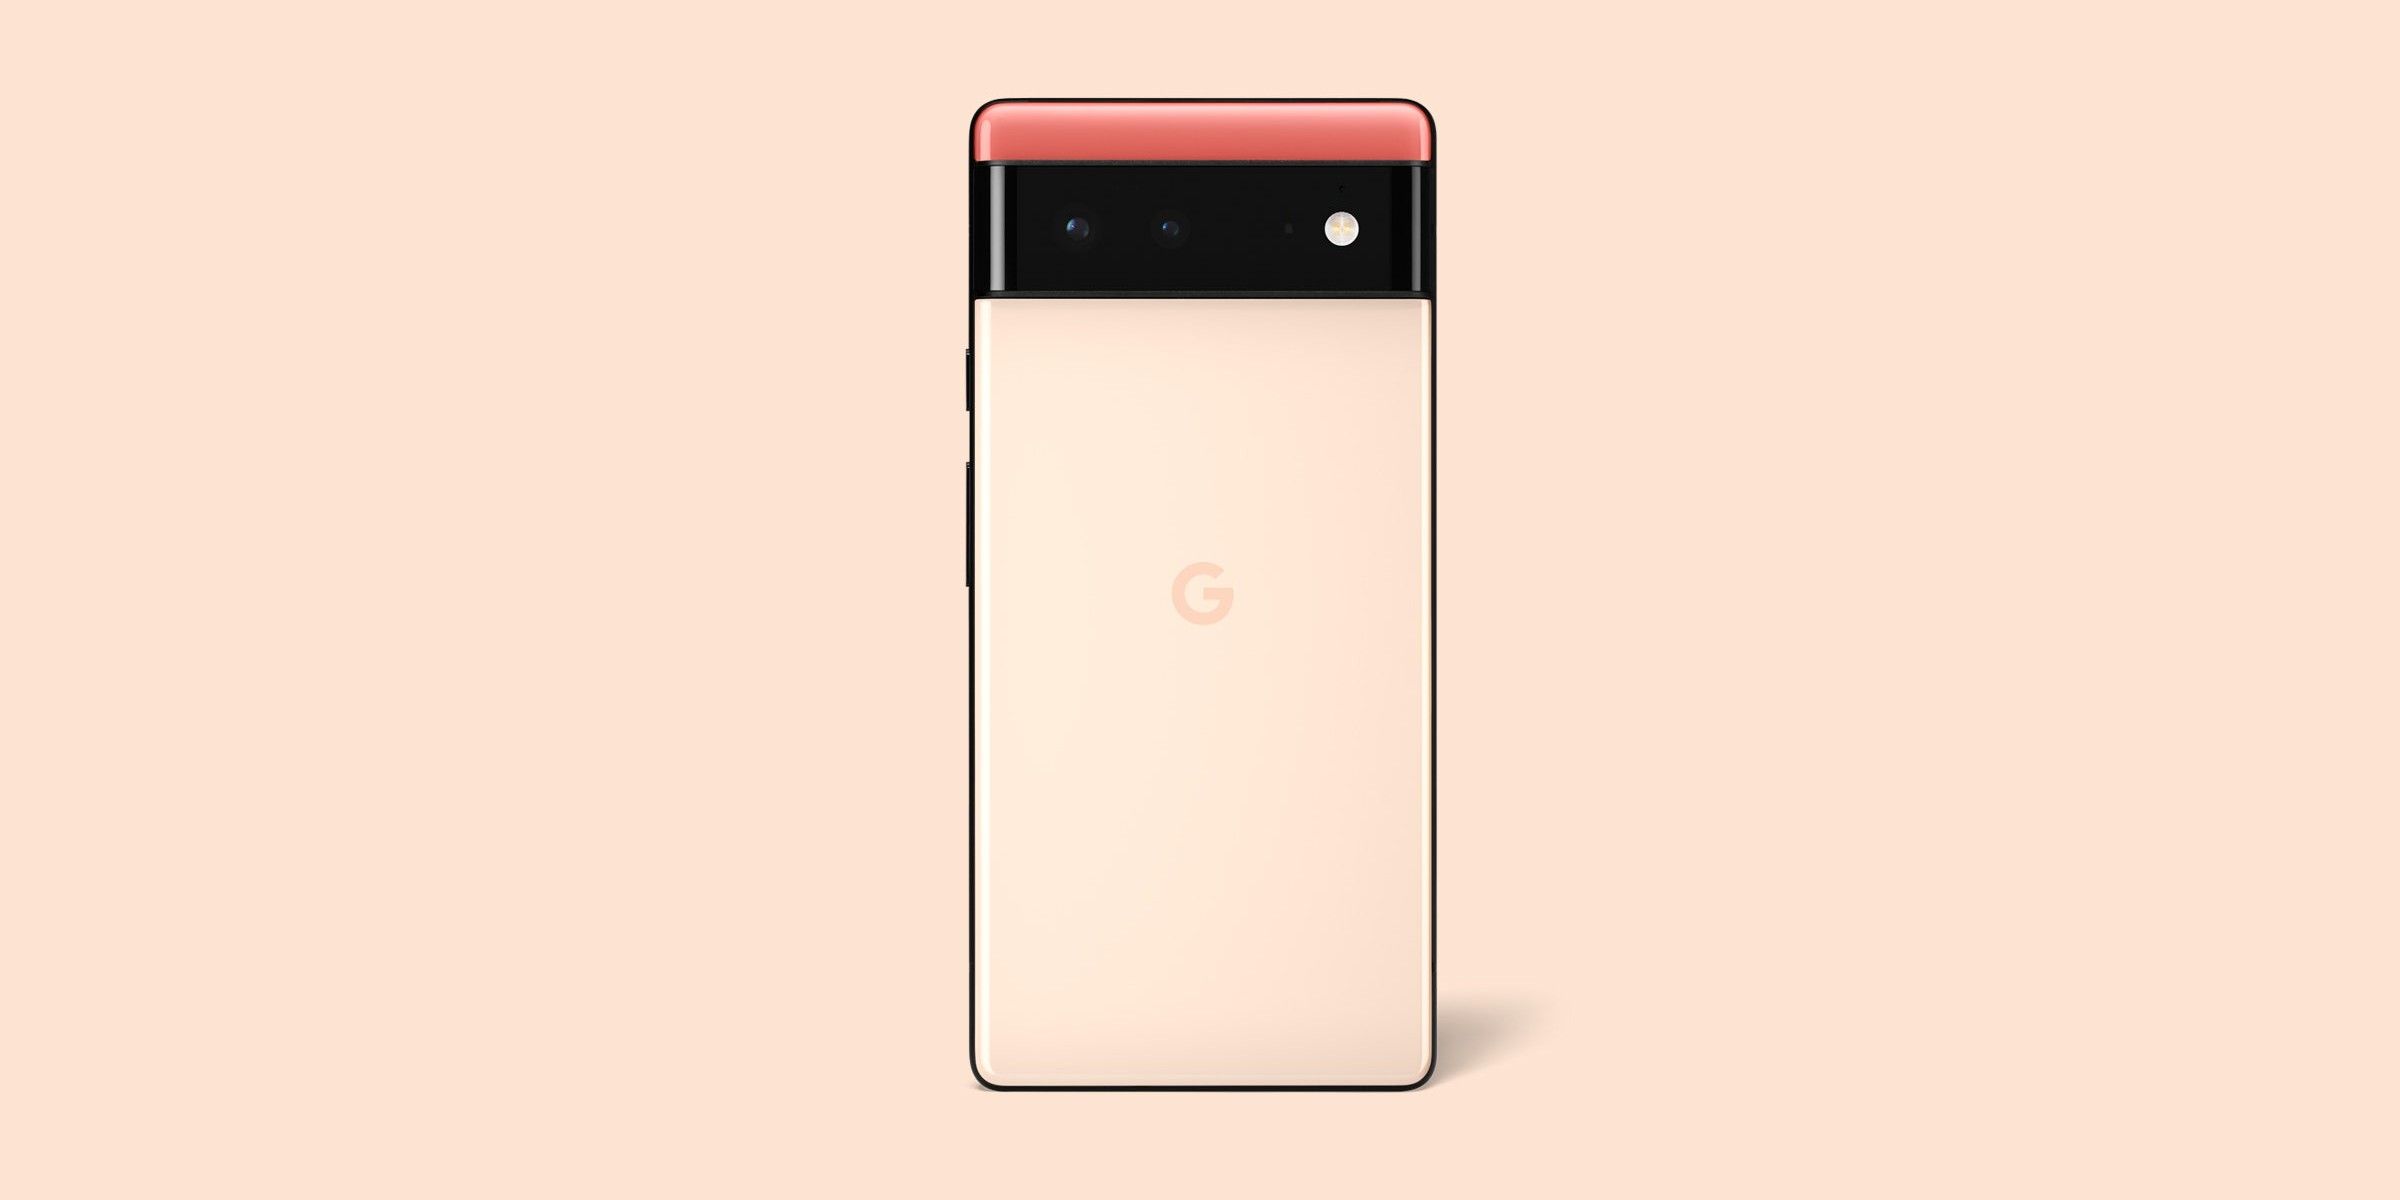 Google Pixel in the pink color image